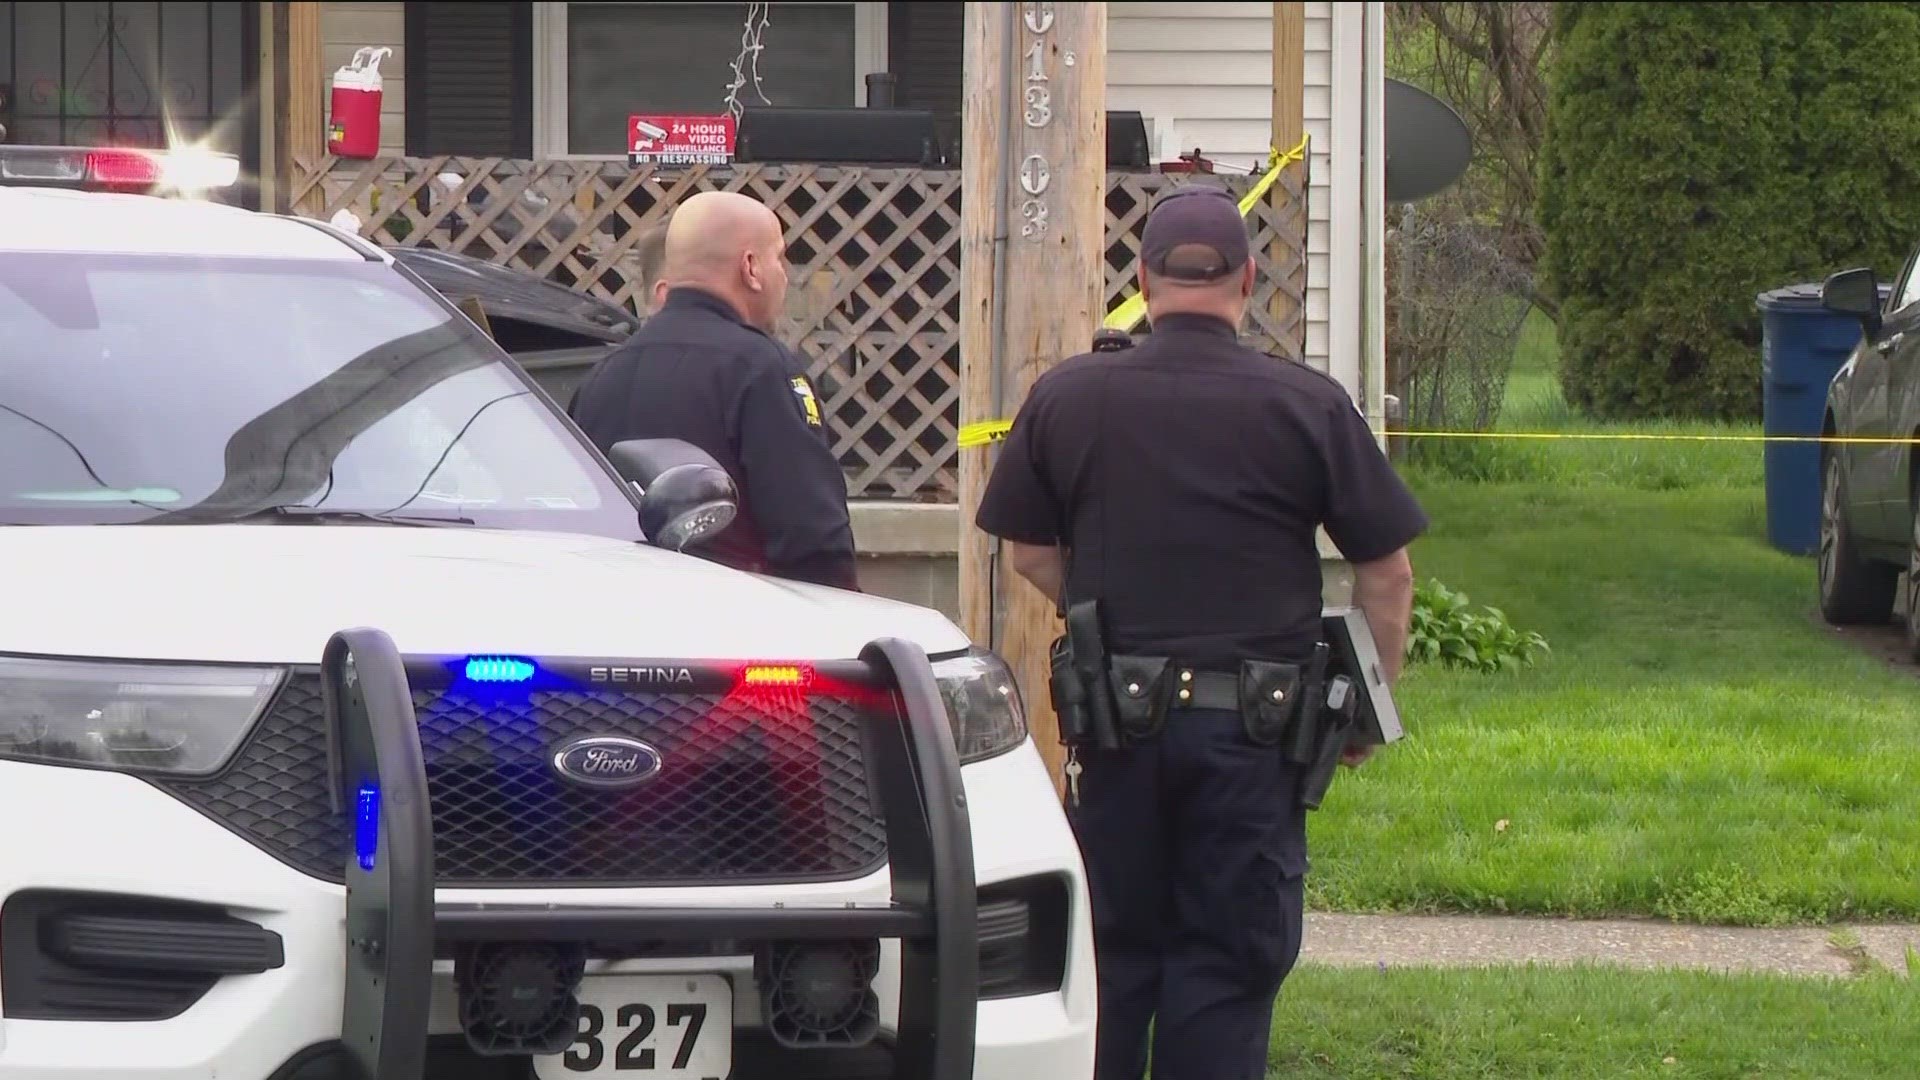 Two shootings in Toledo have involved officers in as many days, with suspects that police claim were armed. A police training manager explains how decisions are made